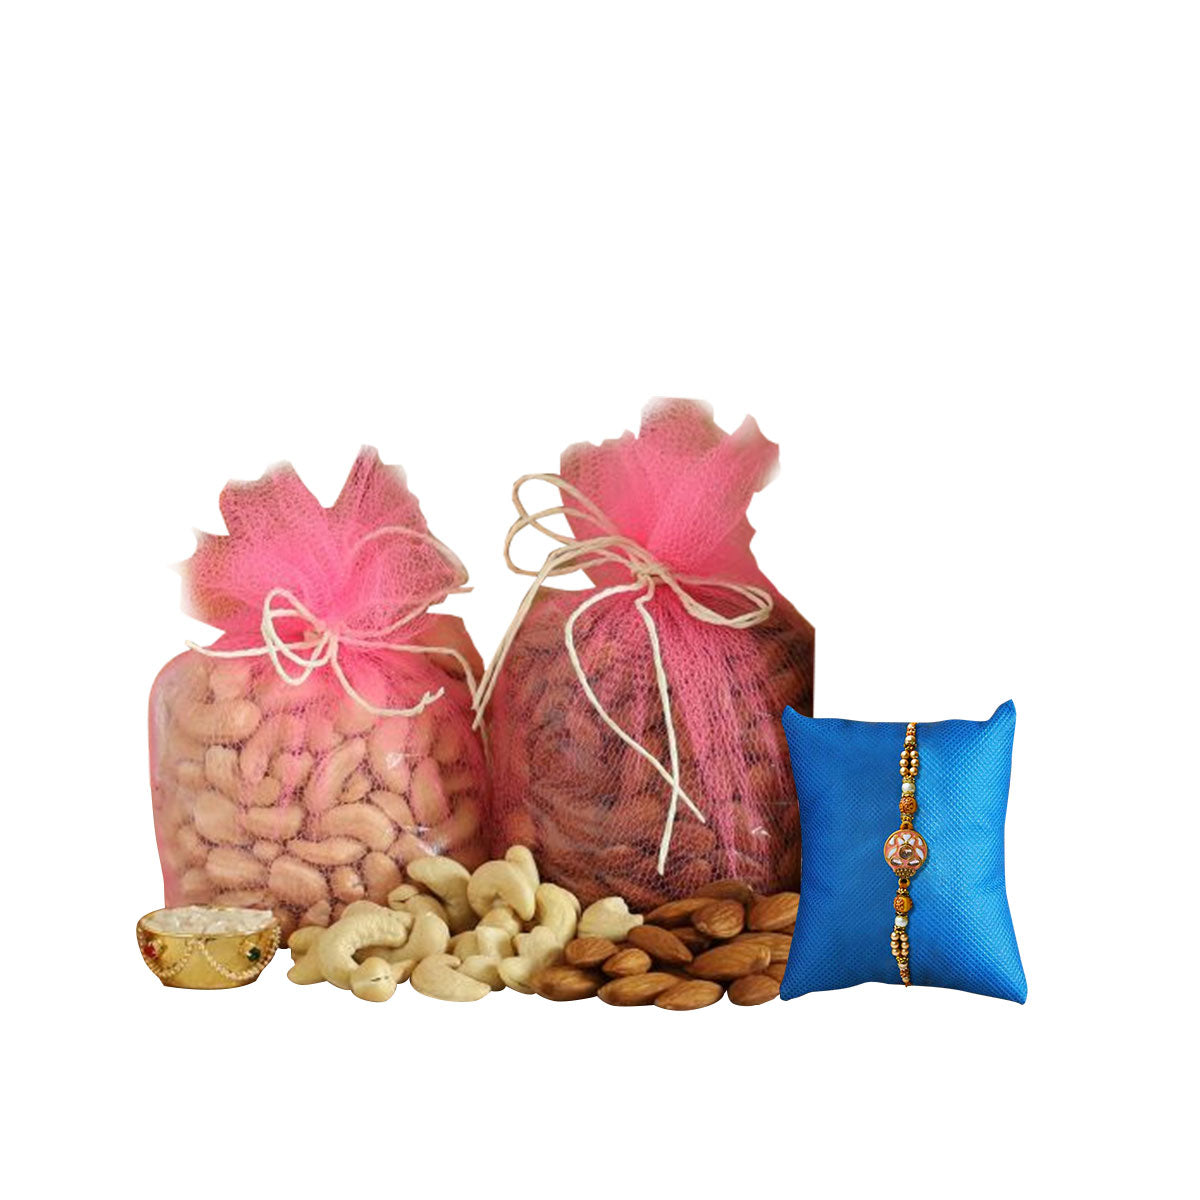 Glammore Dry Fruits Combo Pack, Diwali Dry Fruit Gift Pack, Assorted Dry  Fruits In Handmade Decorative Wooden Gift Box- Pack Of 4 Dry Fruits-Cashews,  - Walmart.com